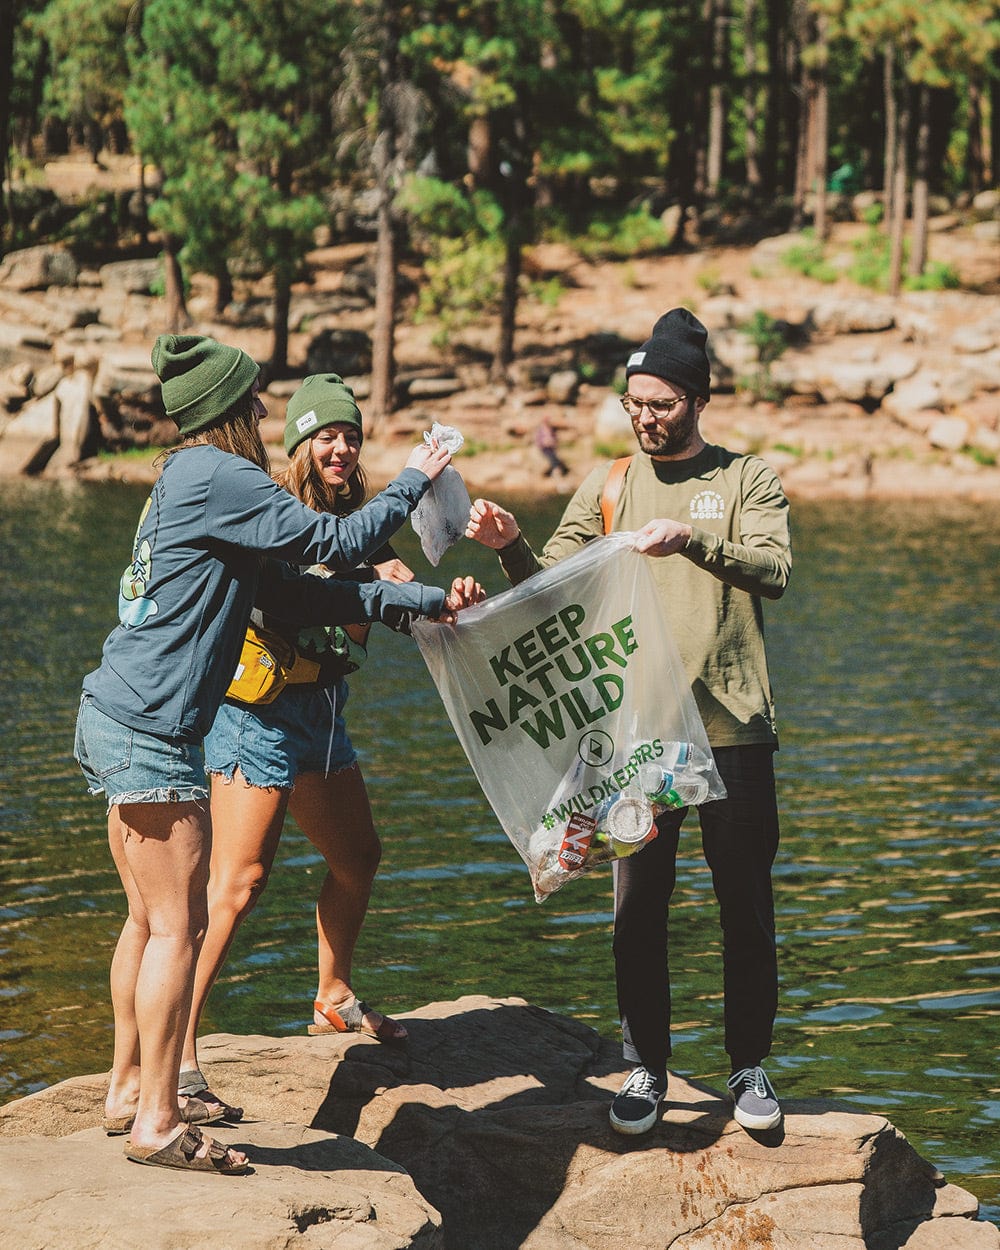 Use Trash Bags As Outdoor Gear!